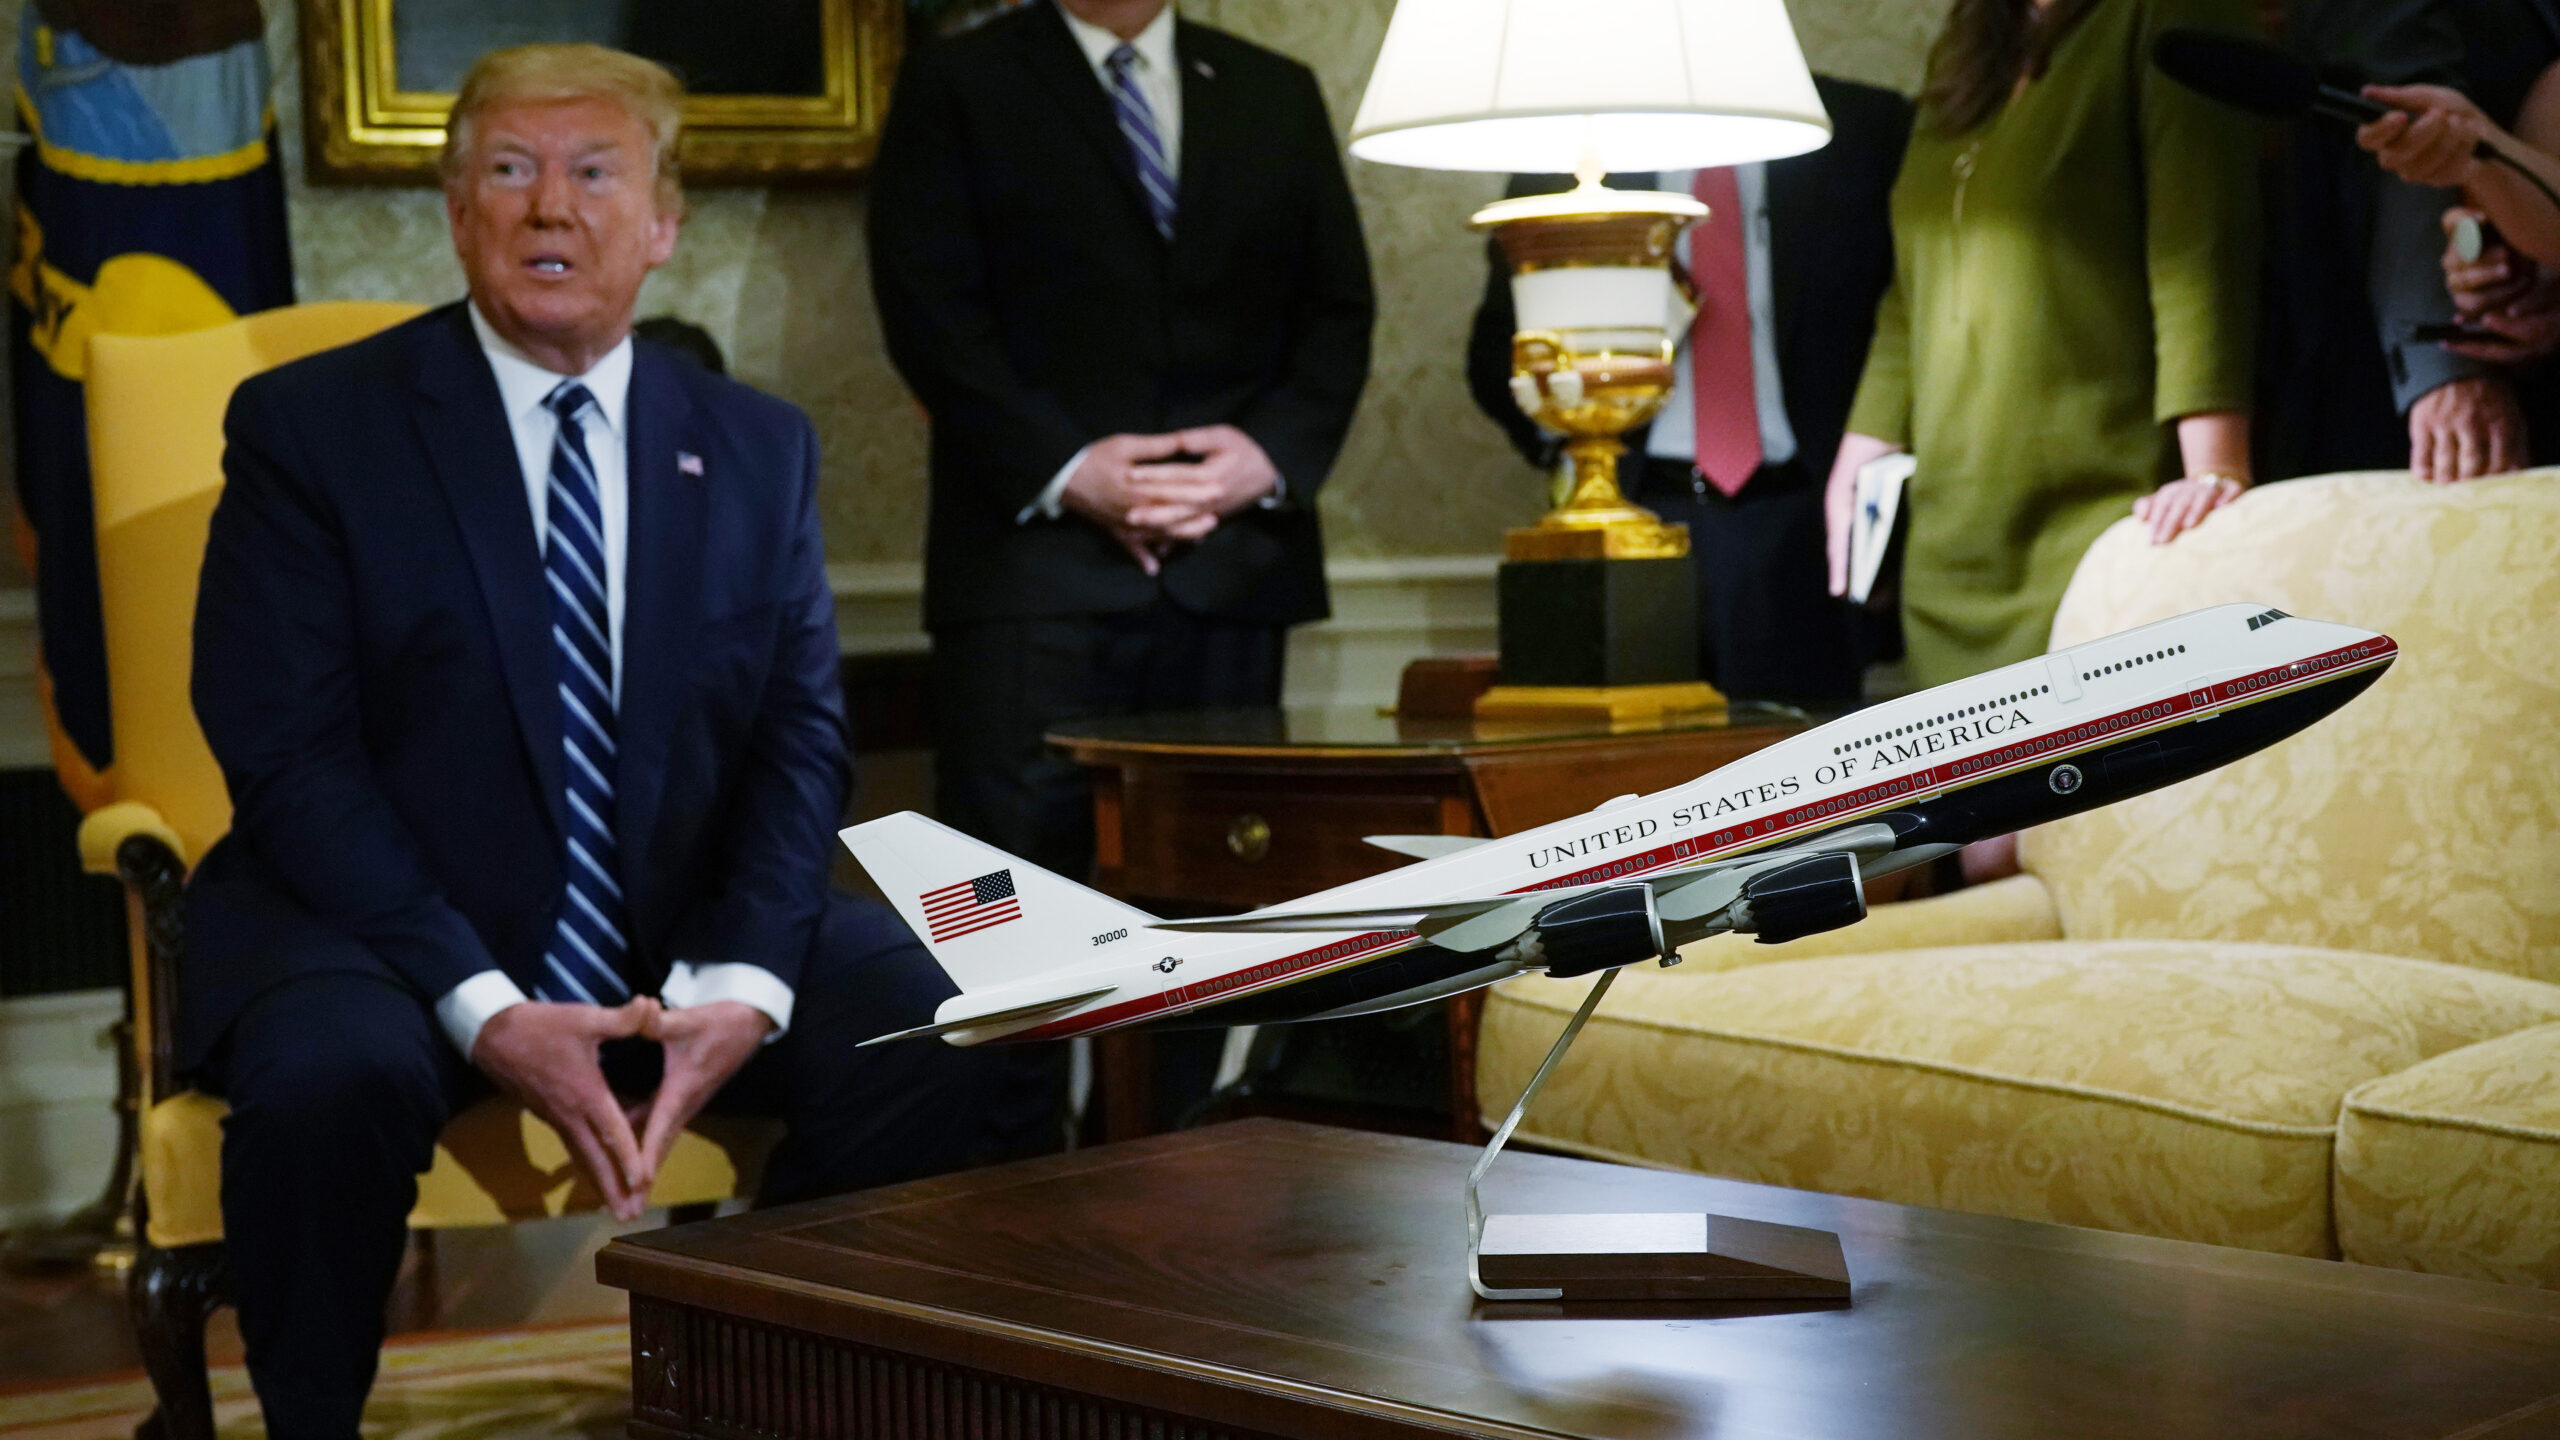 New Air Force One could face ‘quite a significant’ 3-year delay